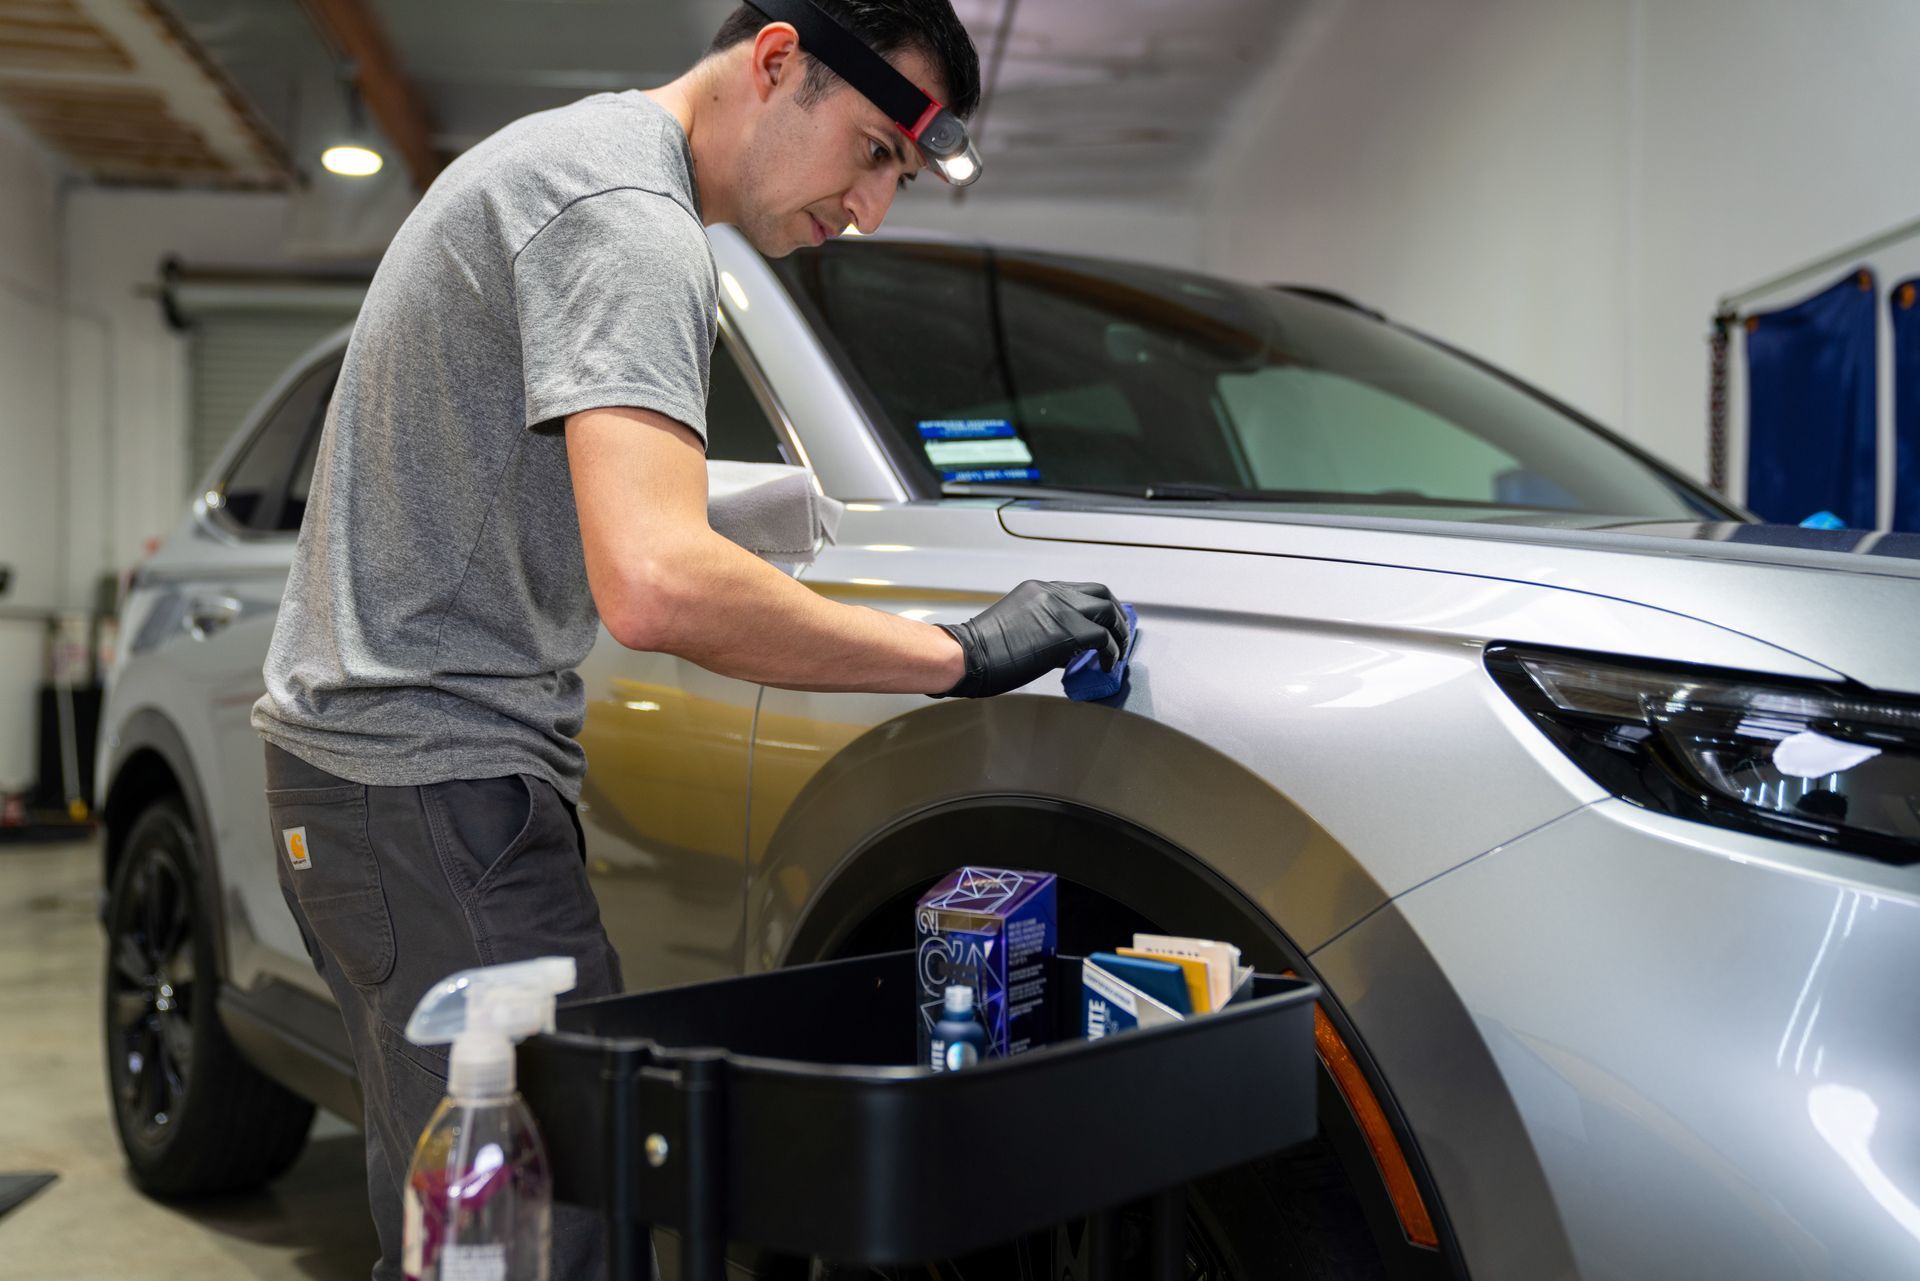 A man is applying Gyeon Ceramic Coating on the fender of a car in a garage .